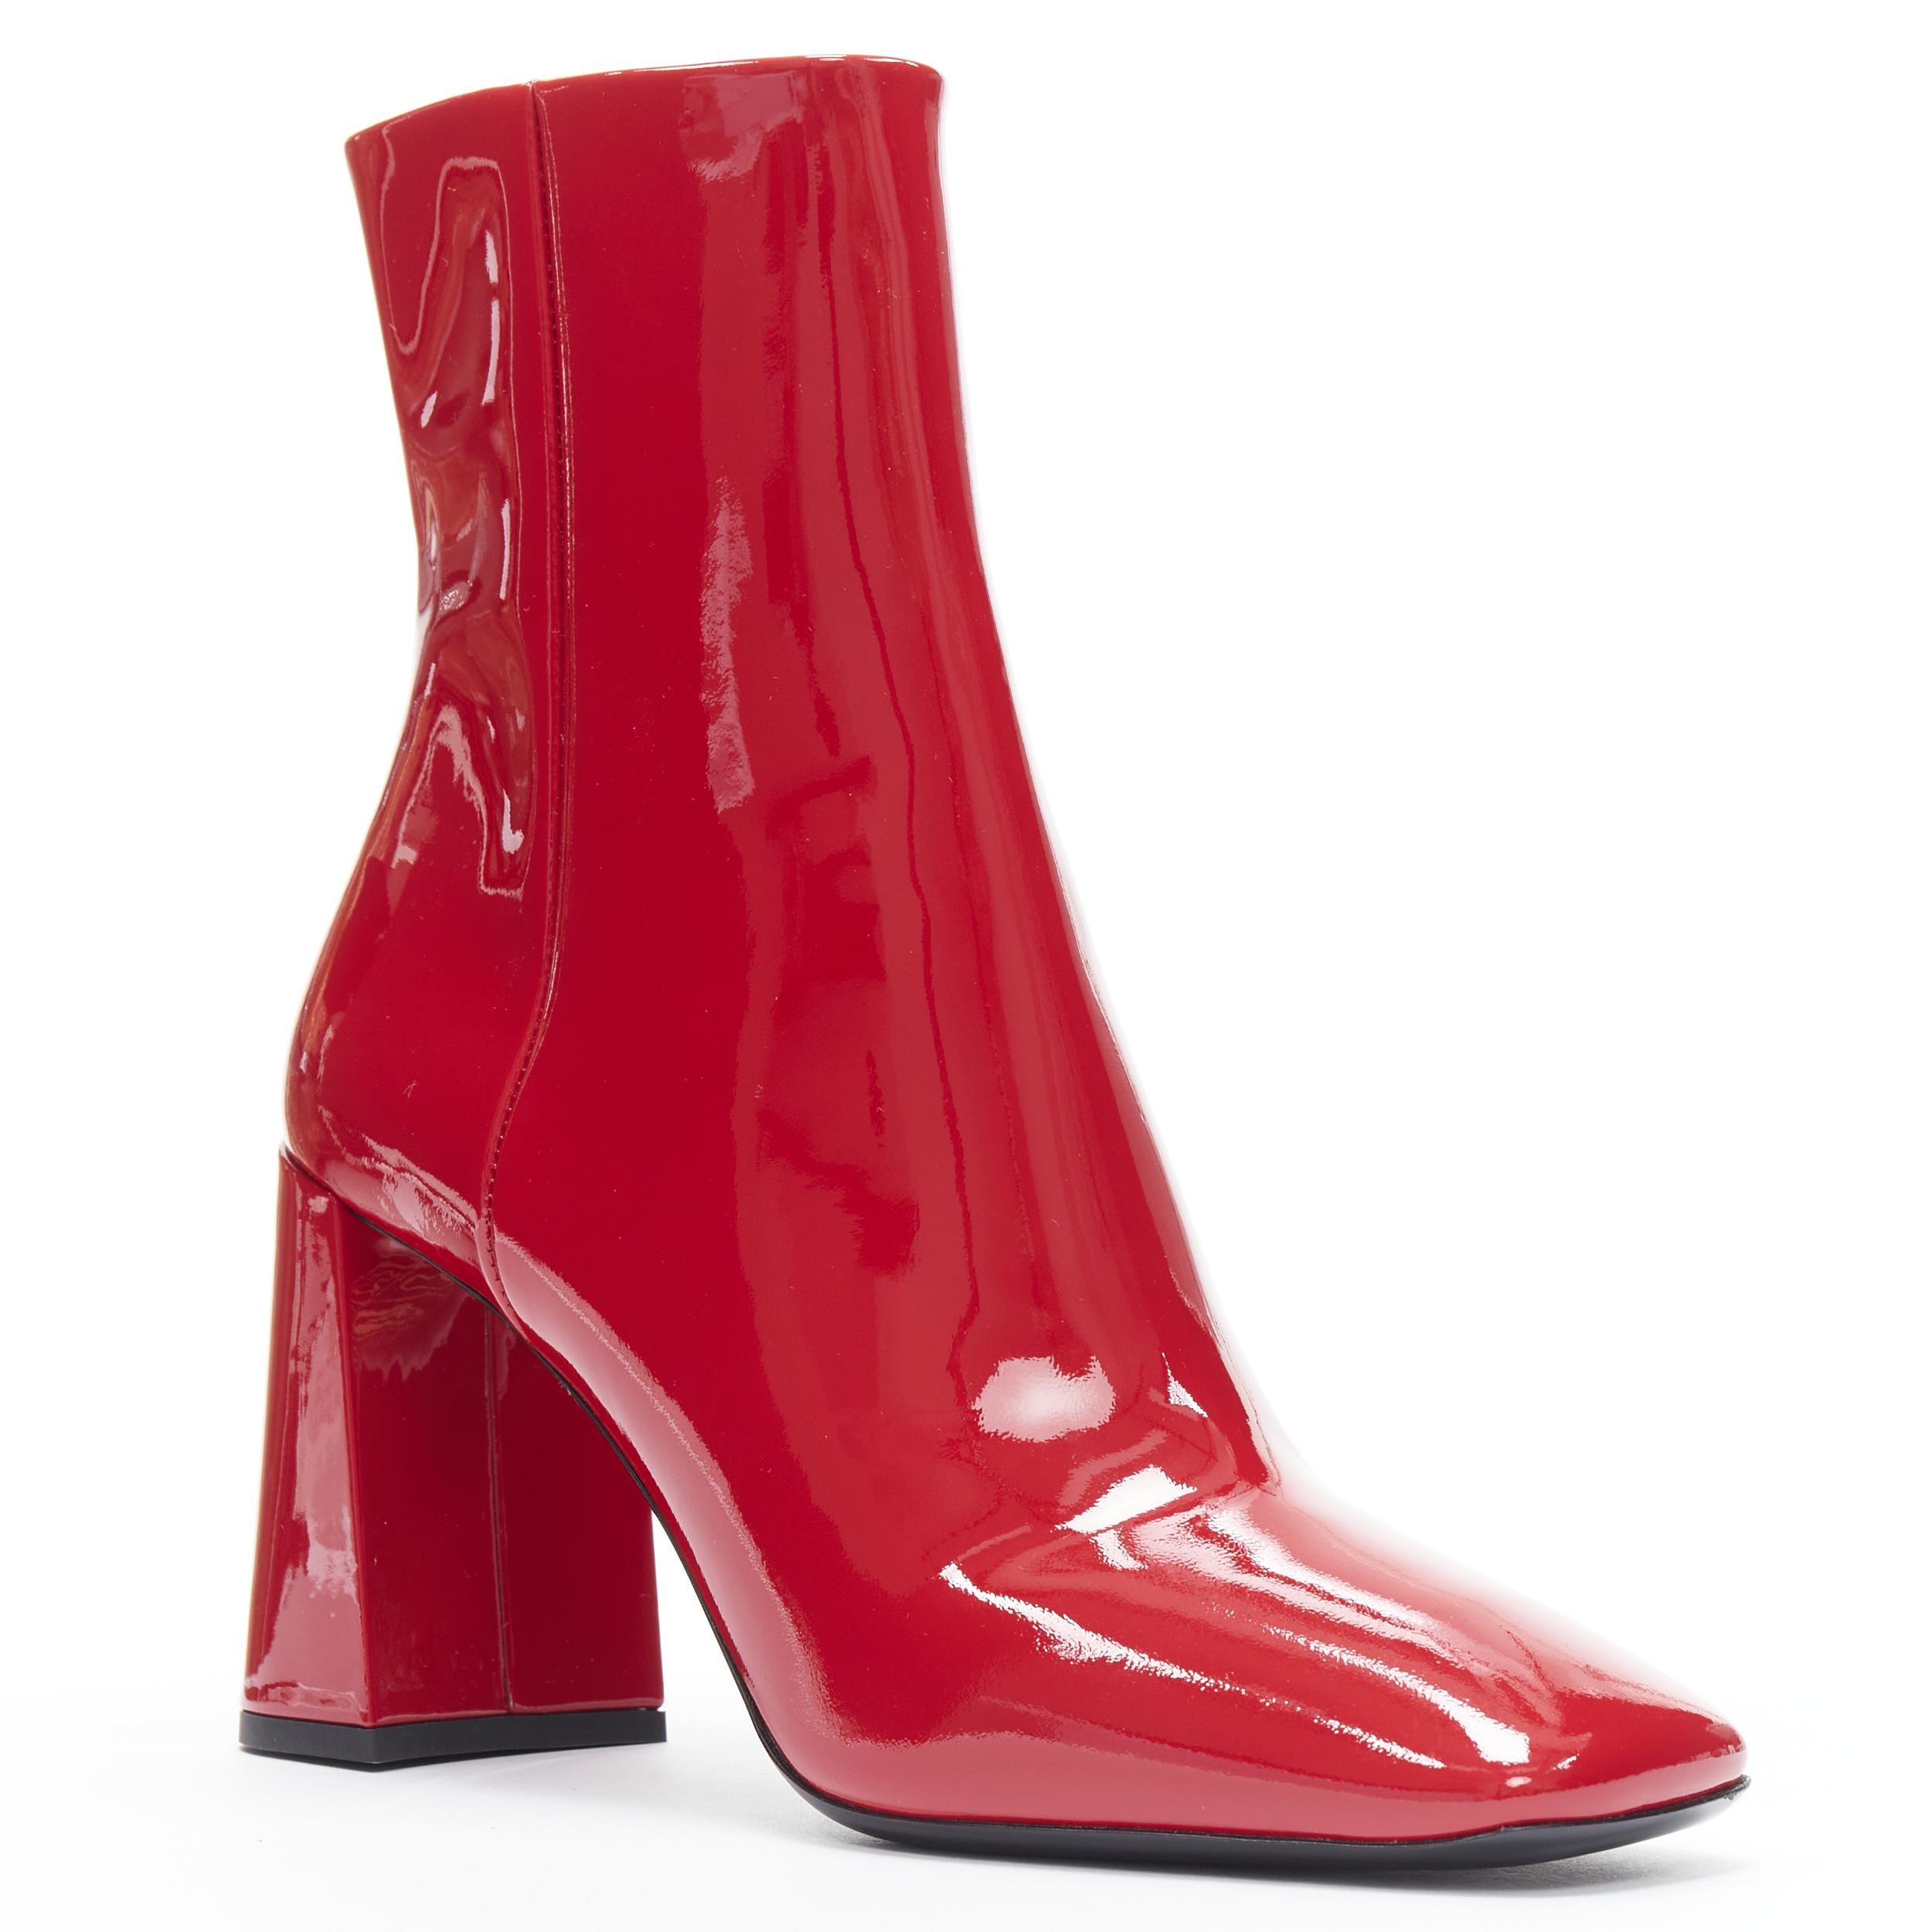 new PRADA lipstick red patent square toe chunky heel ankle boot EU35 
Reference: TGAS/B01295 
Brand: Prada 
Designer: Miuccia Prada 
Model: Red patent boot 
Material: Patent Leather 
Color: Red 
Pattern: Solid 
Closure: Zip 
Extra Detail: Square